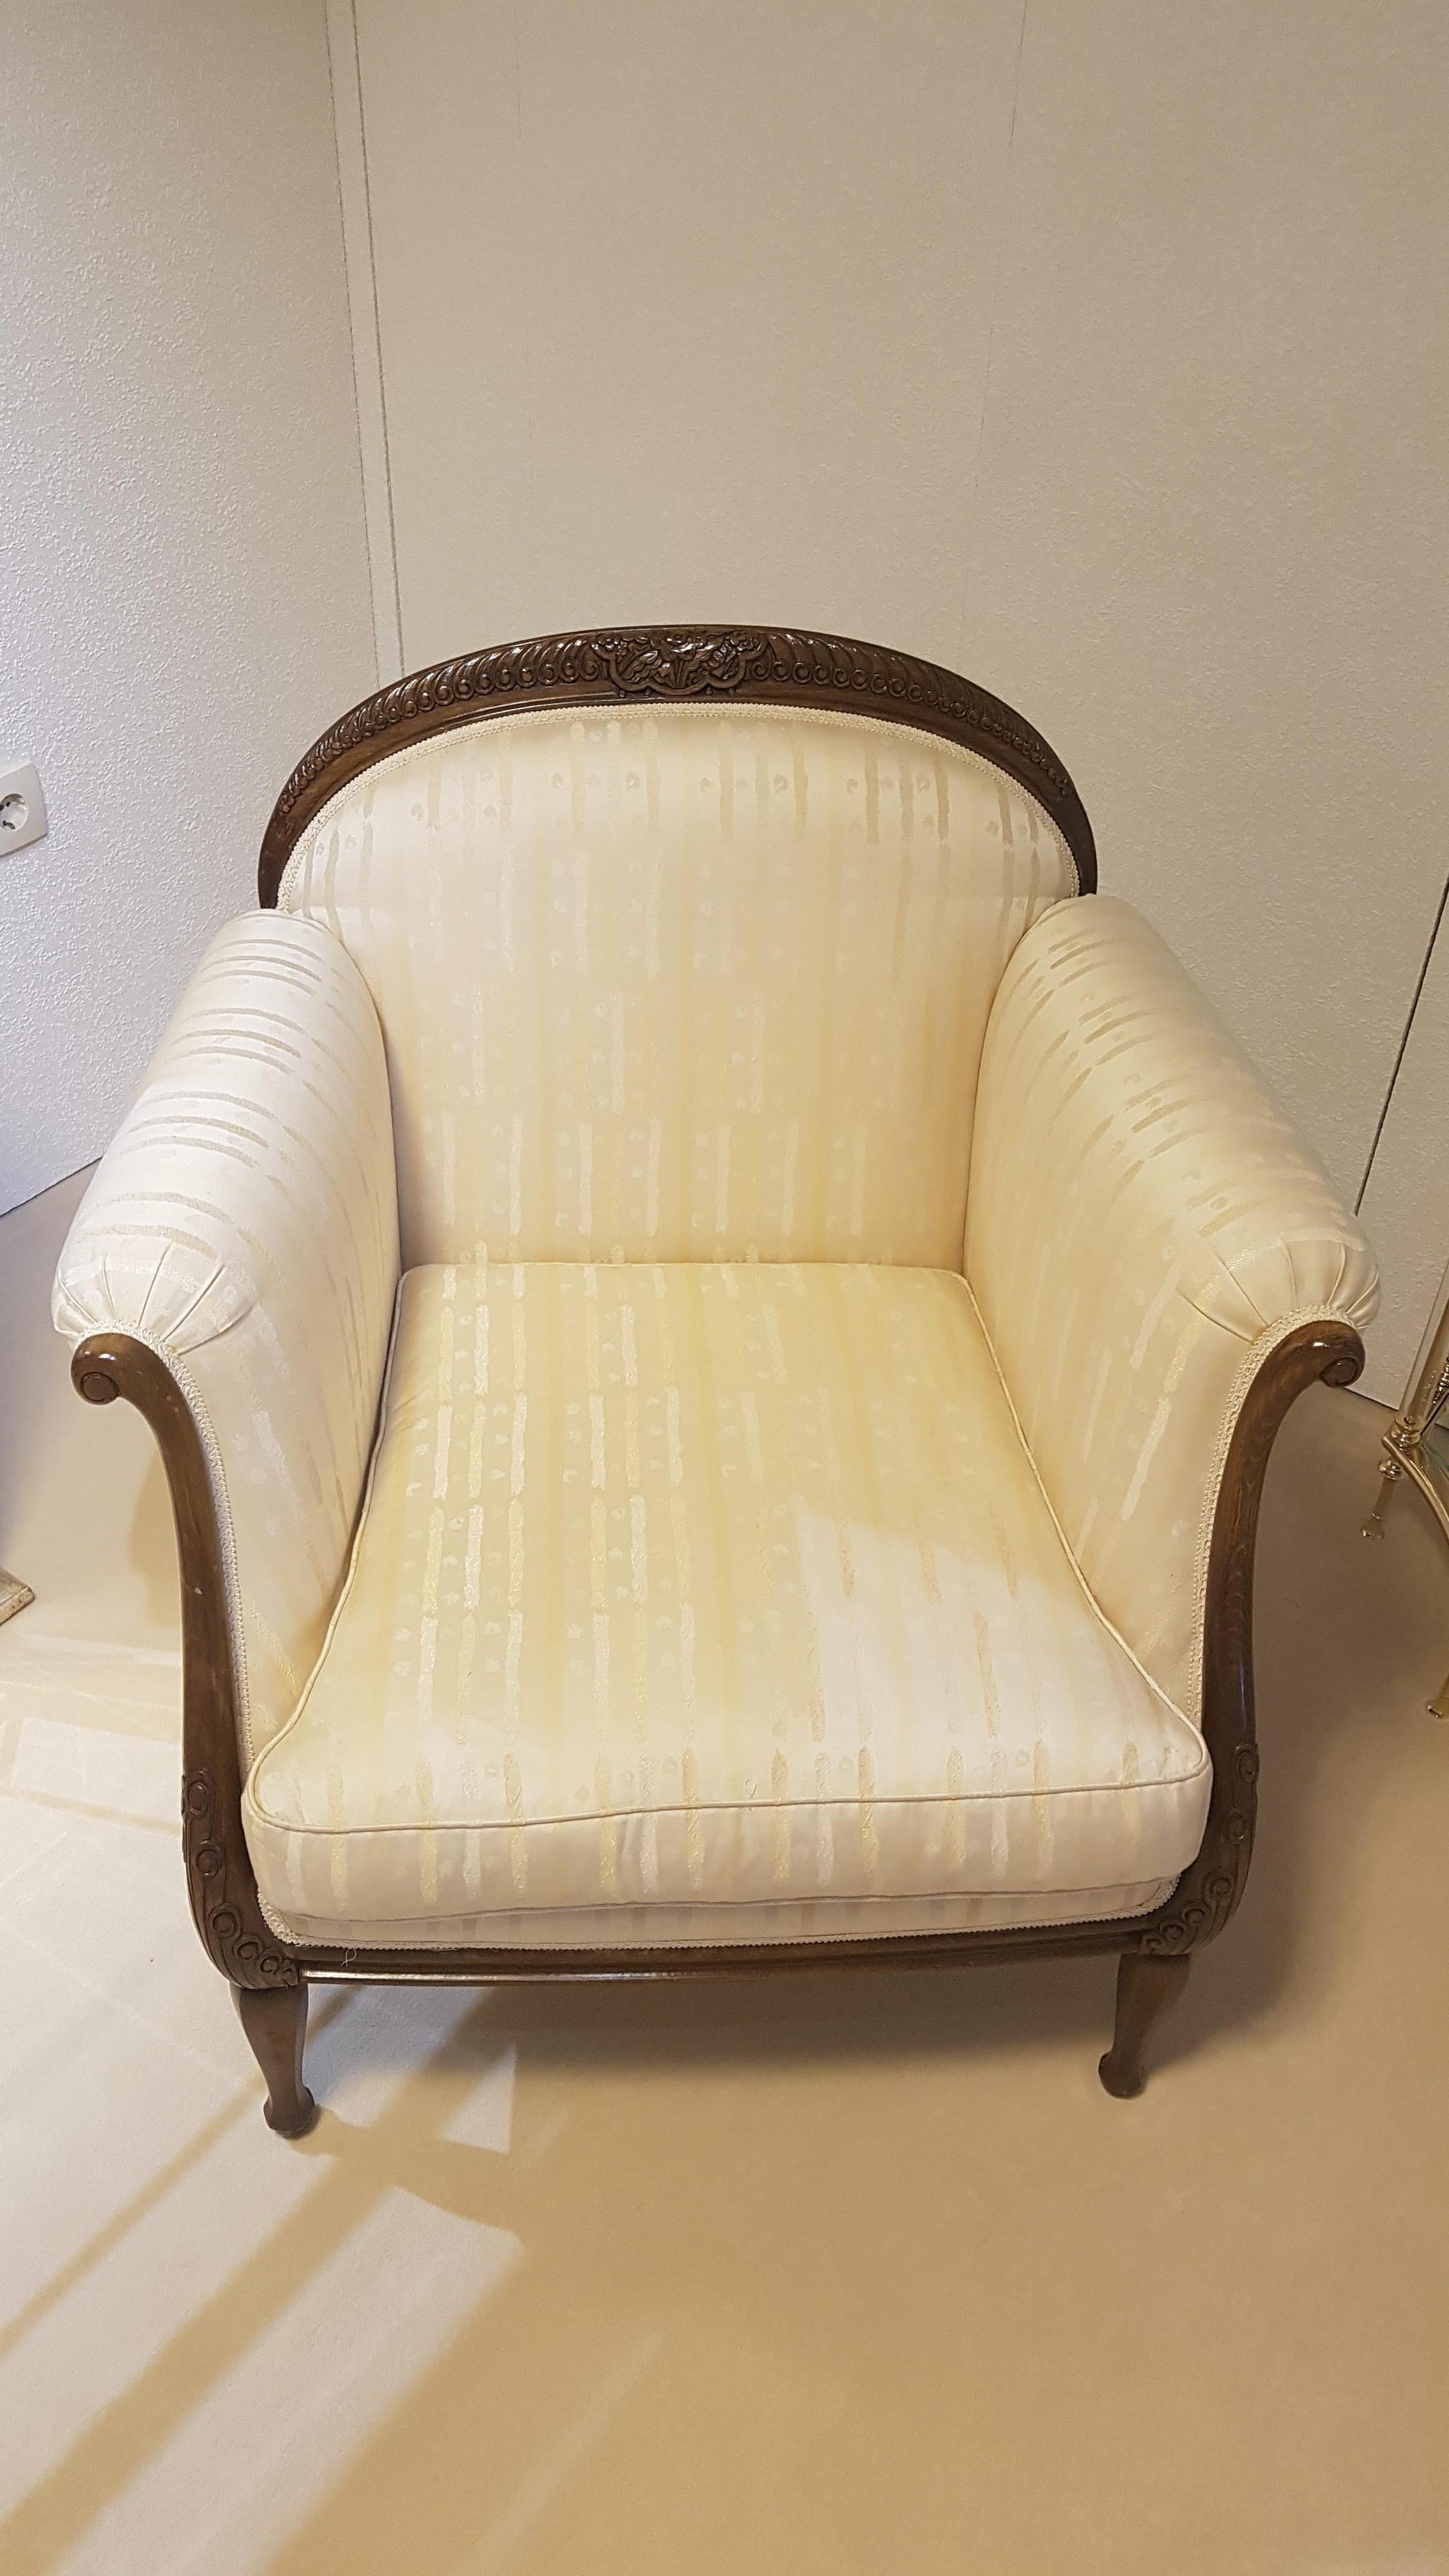 Two Classic design armchairs made of elegant and massive dark walnut wood and covered with a high end crème white fabric. The wood part features beautifully carved ornamentation while the fabric offers small stripe details. Comfortable cushions all